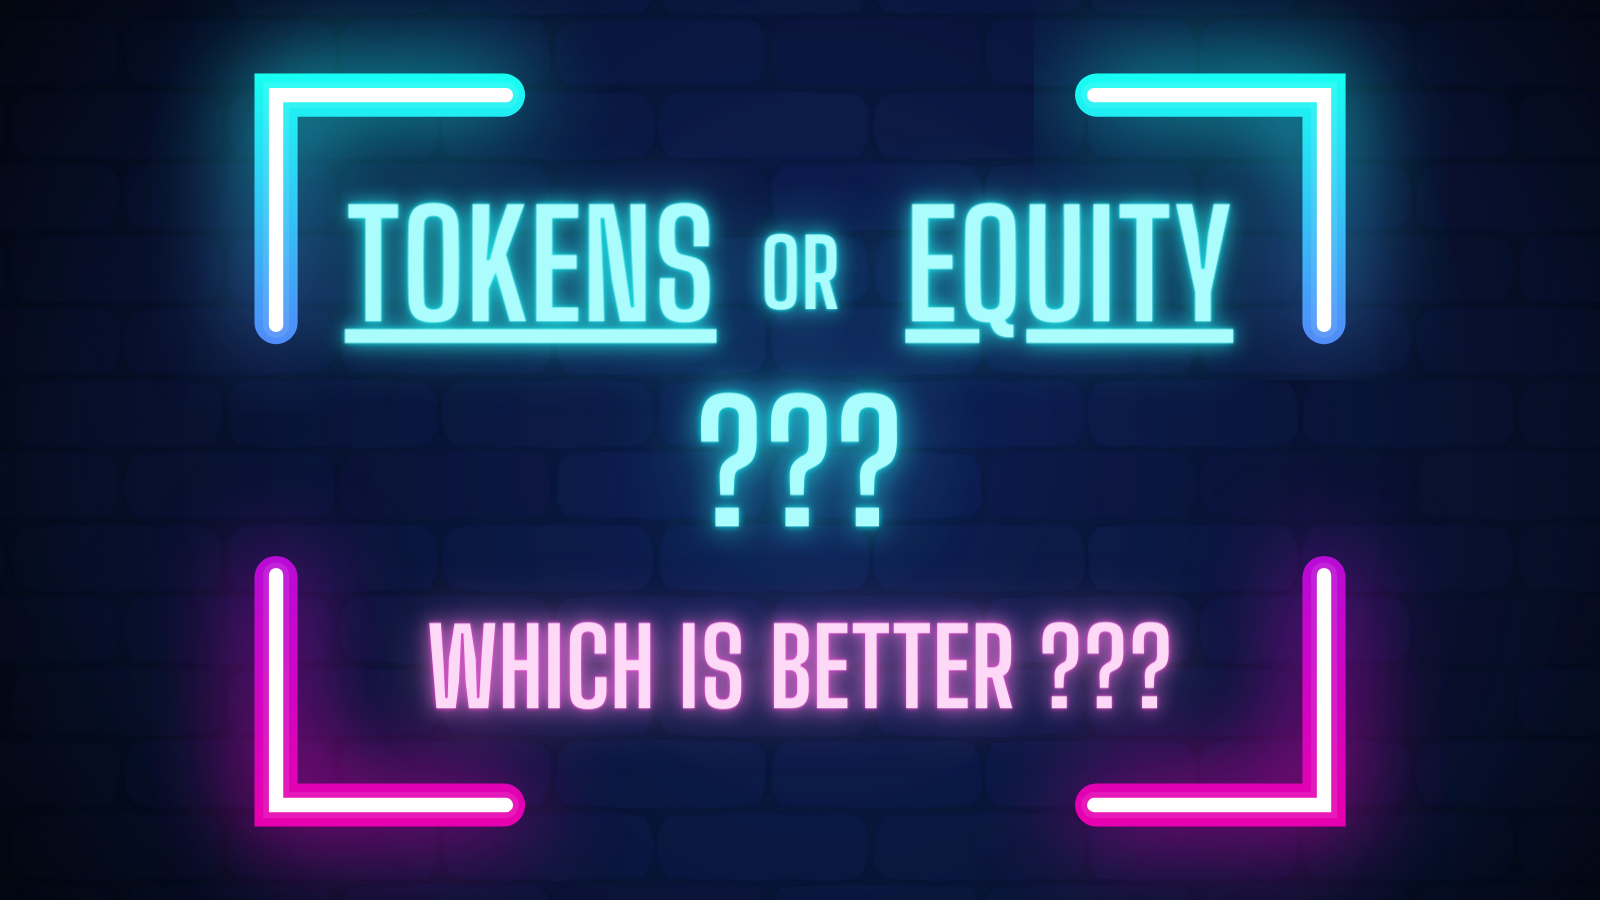 Tokens or Equity? Which is better?